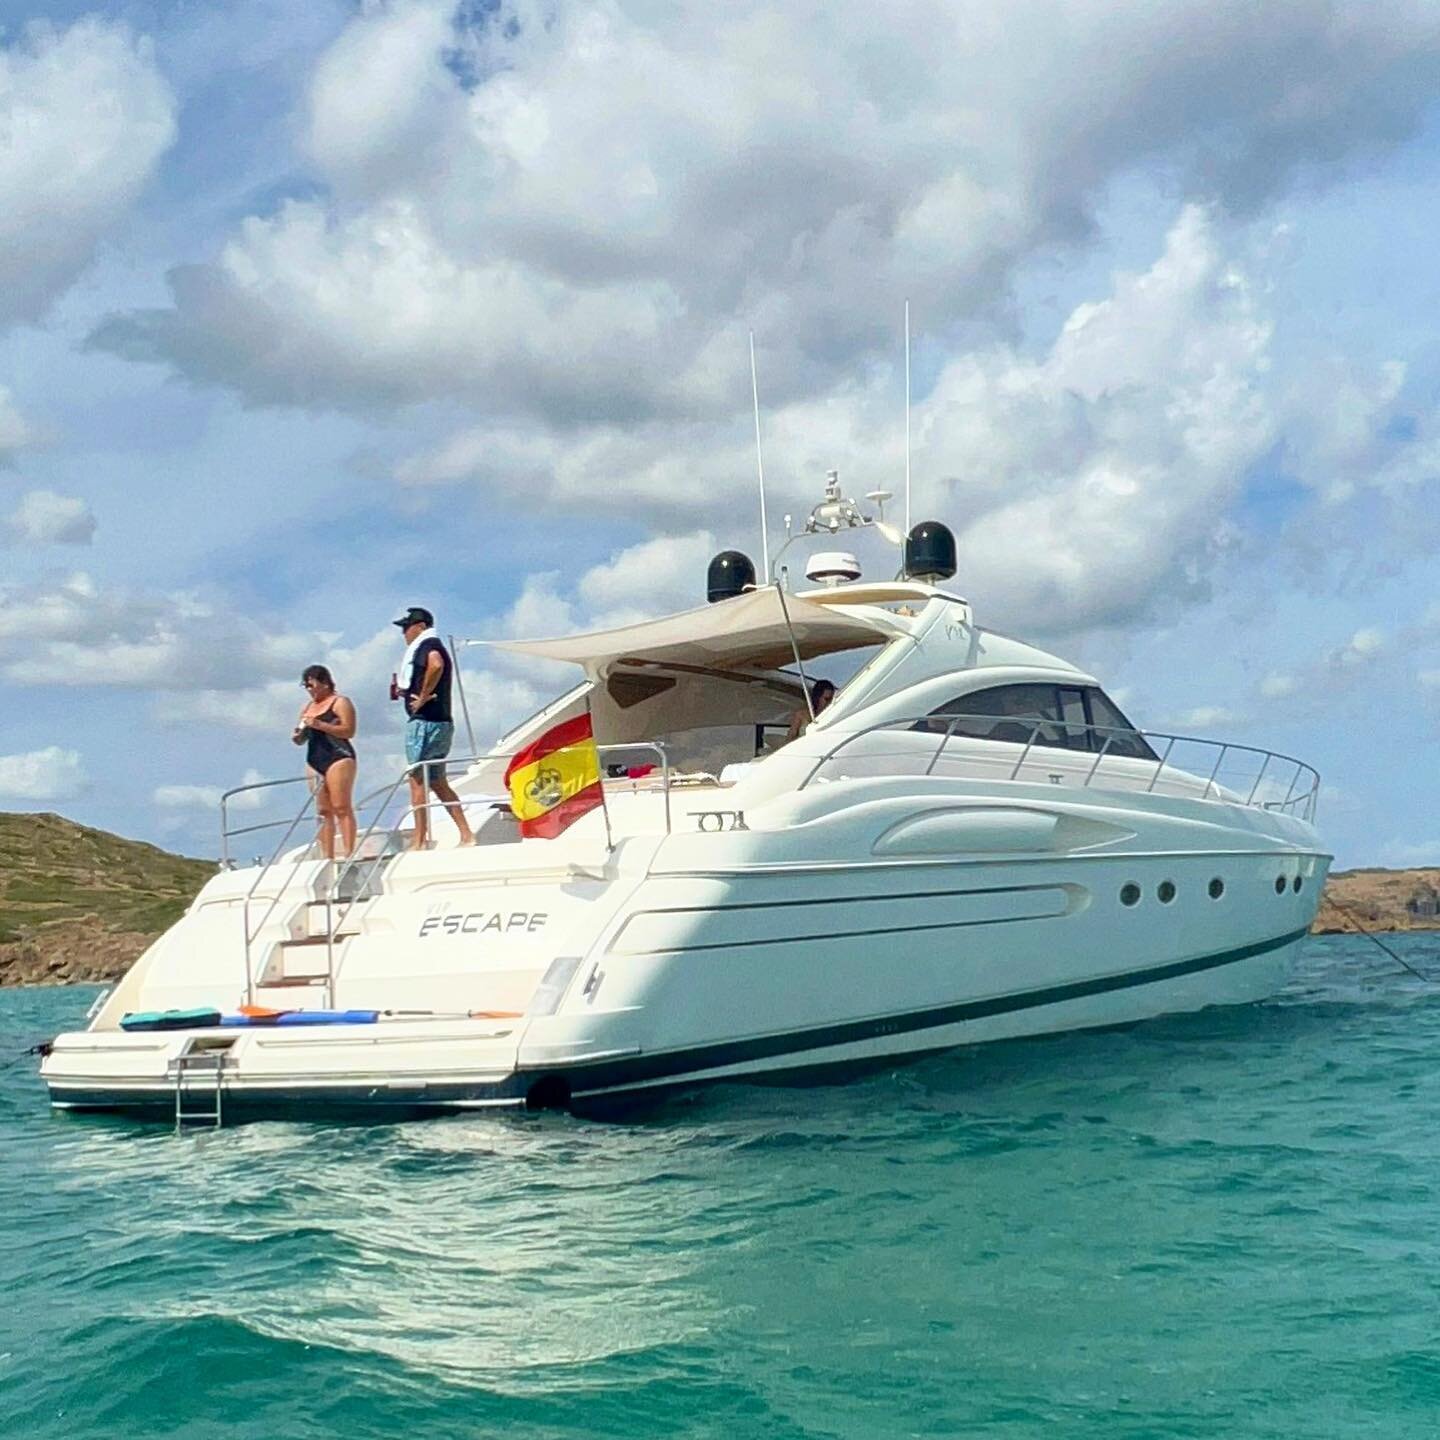 If you&rsquo;re boat charter on vacation isn&rsquo;t private, you aren&rsquo;t traveling with Flow World Travel. This was our last boat in Spain. And while boats are different in various destinations, boat day is always a trip highlight! If you know 